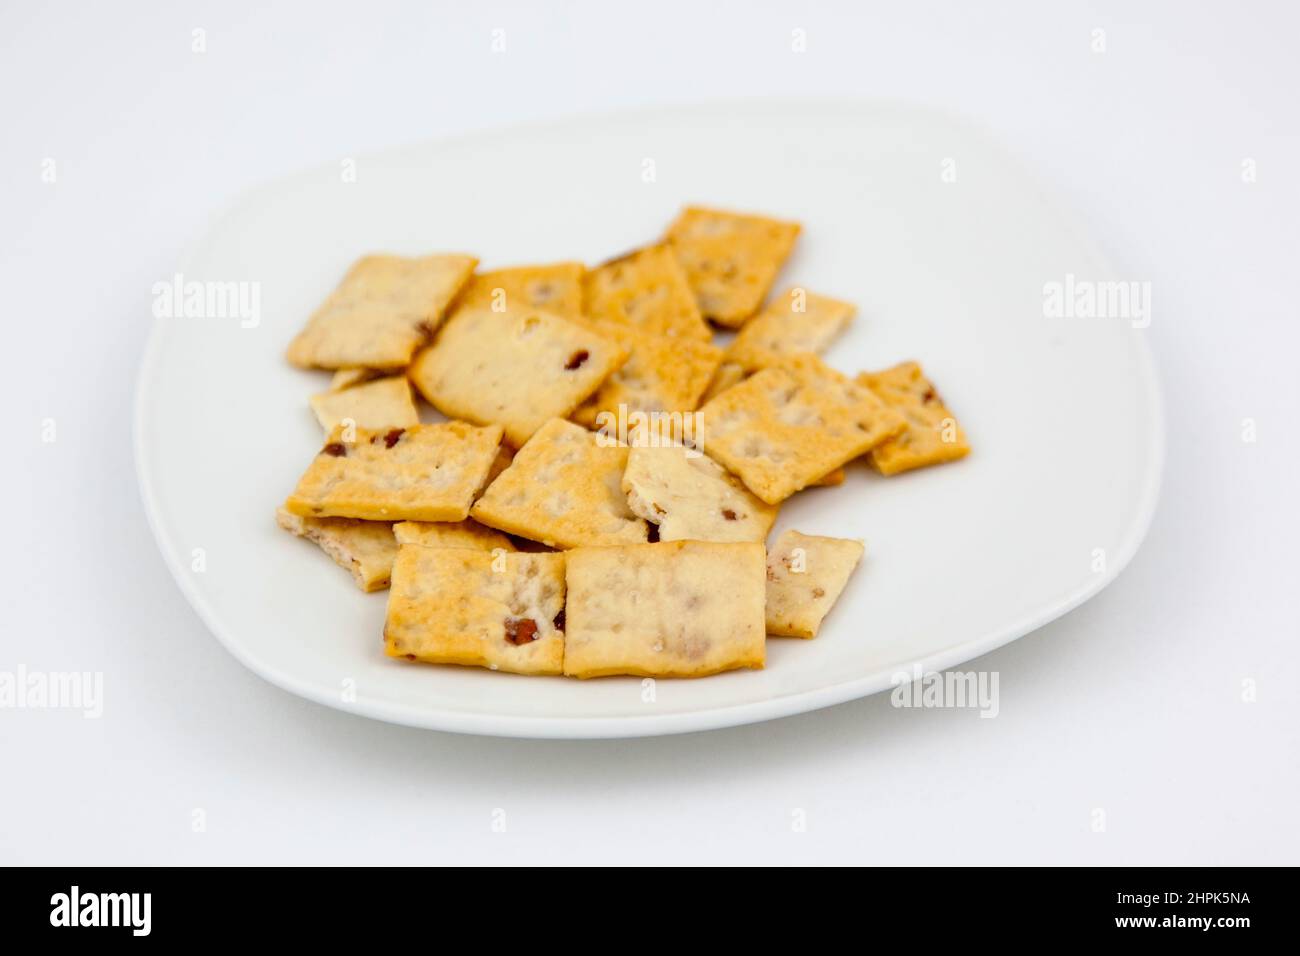 Food, Snacks, Baked, Italian crackers with cranberry & sesame seeds. Stock Photo